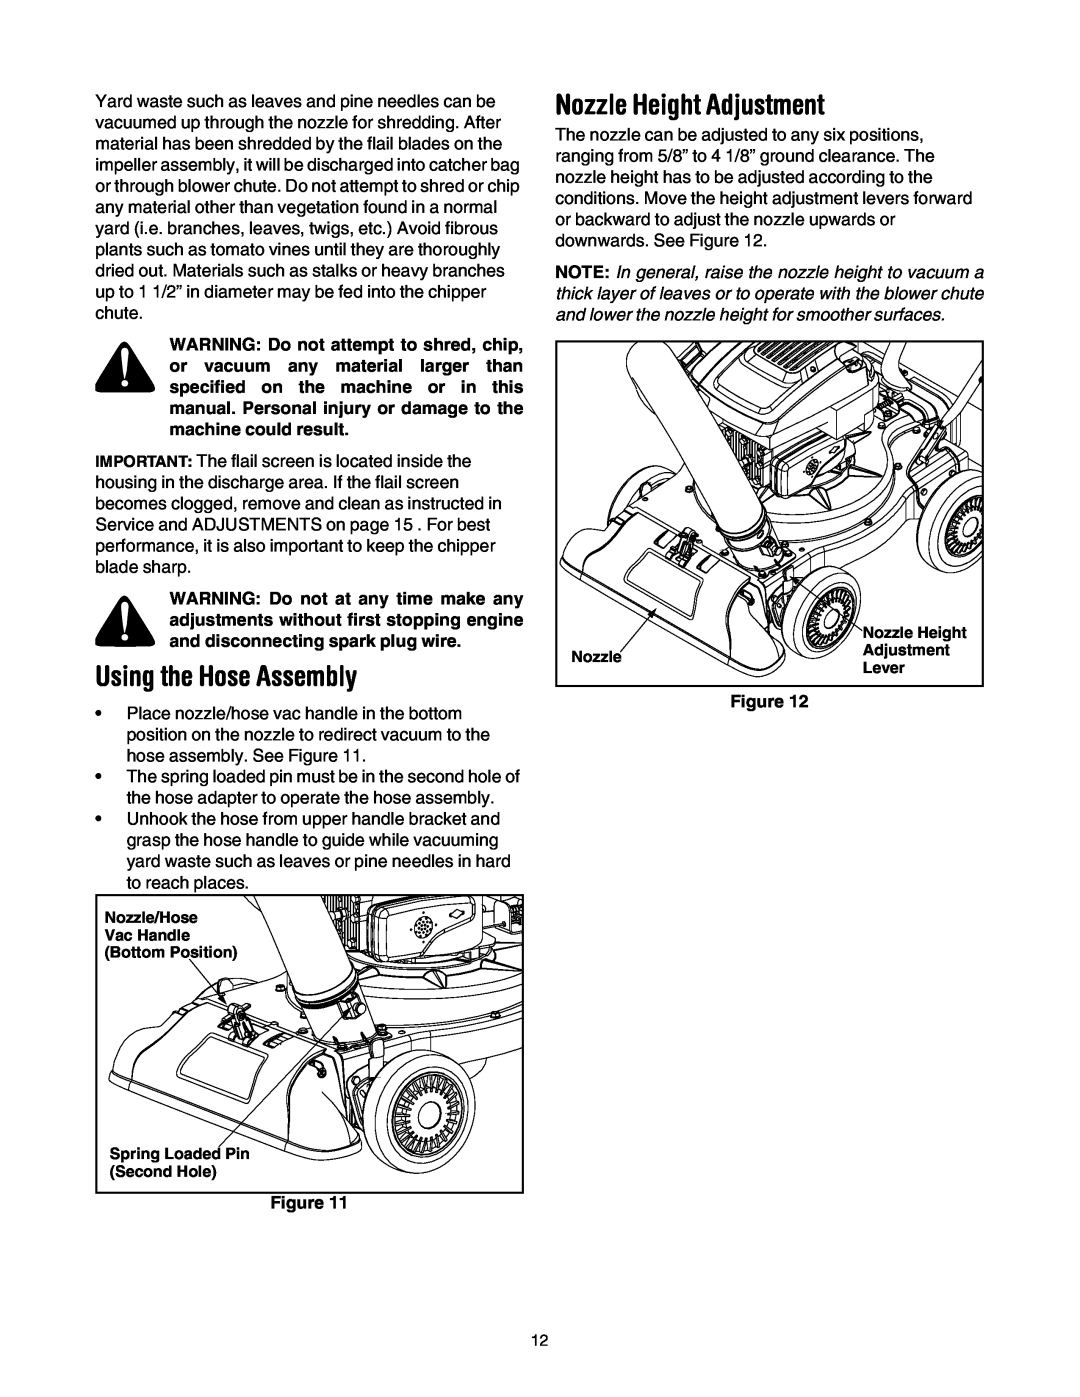 Sears 247.77055 operating instructions Using the Hose Assembly, Nozzle Height Adjustment 